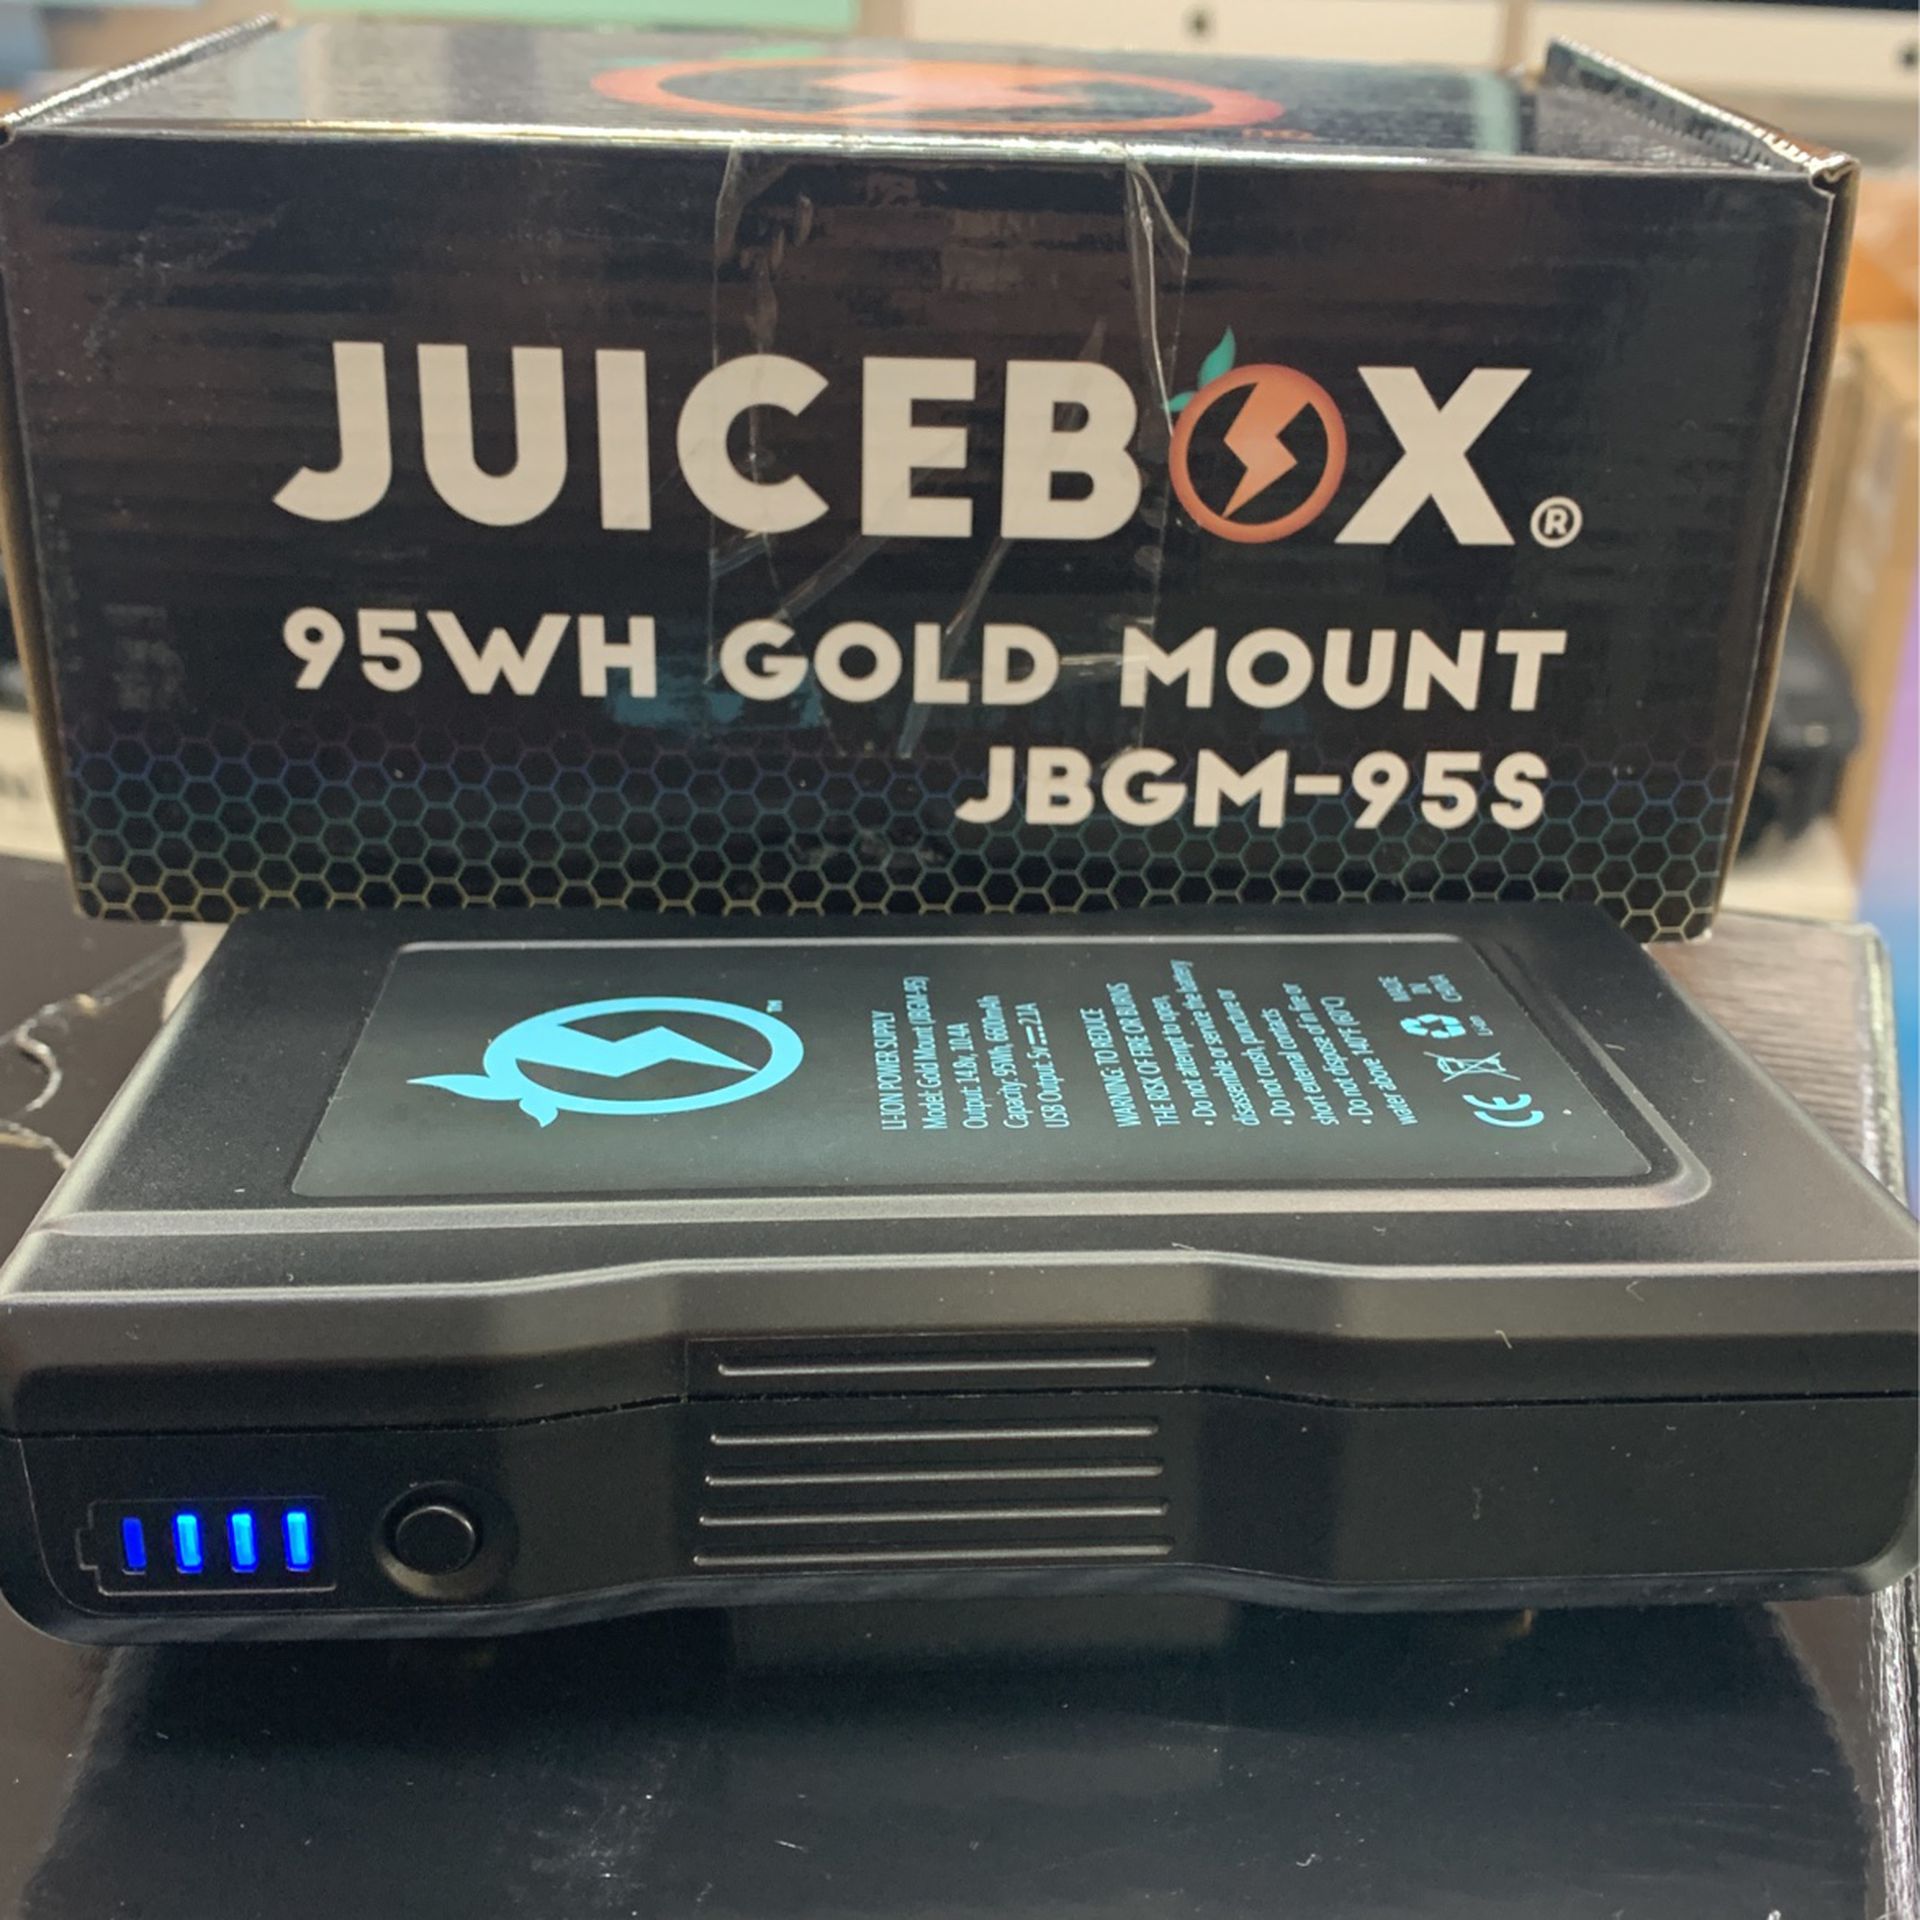 Juicebox Lithium-Ion Battery (95Wh, Gold Mount)